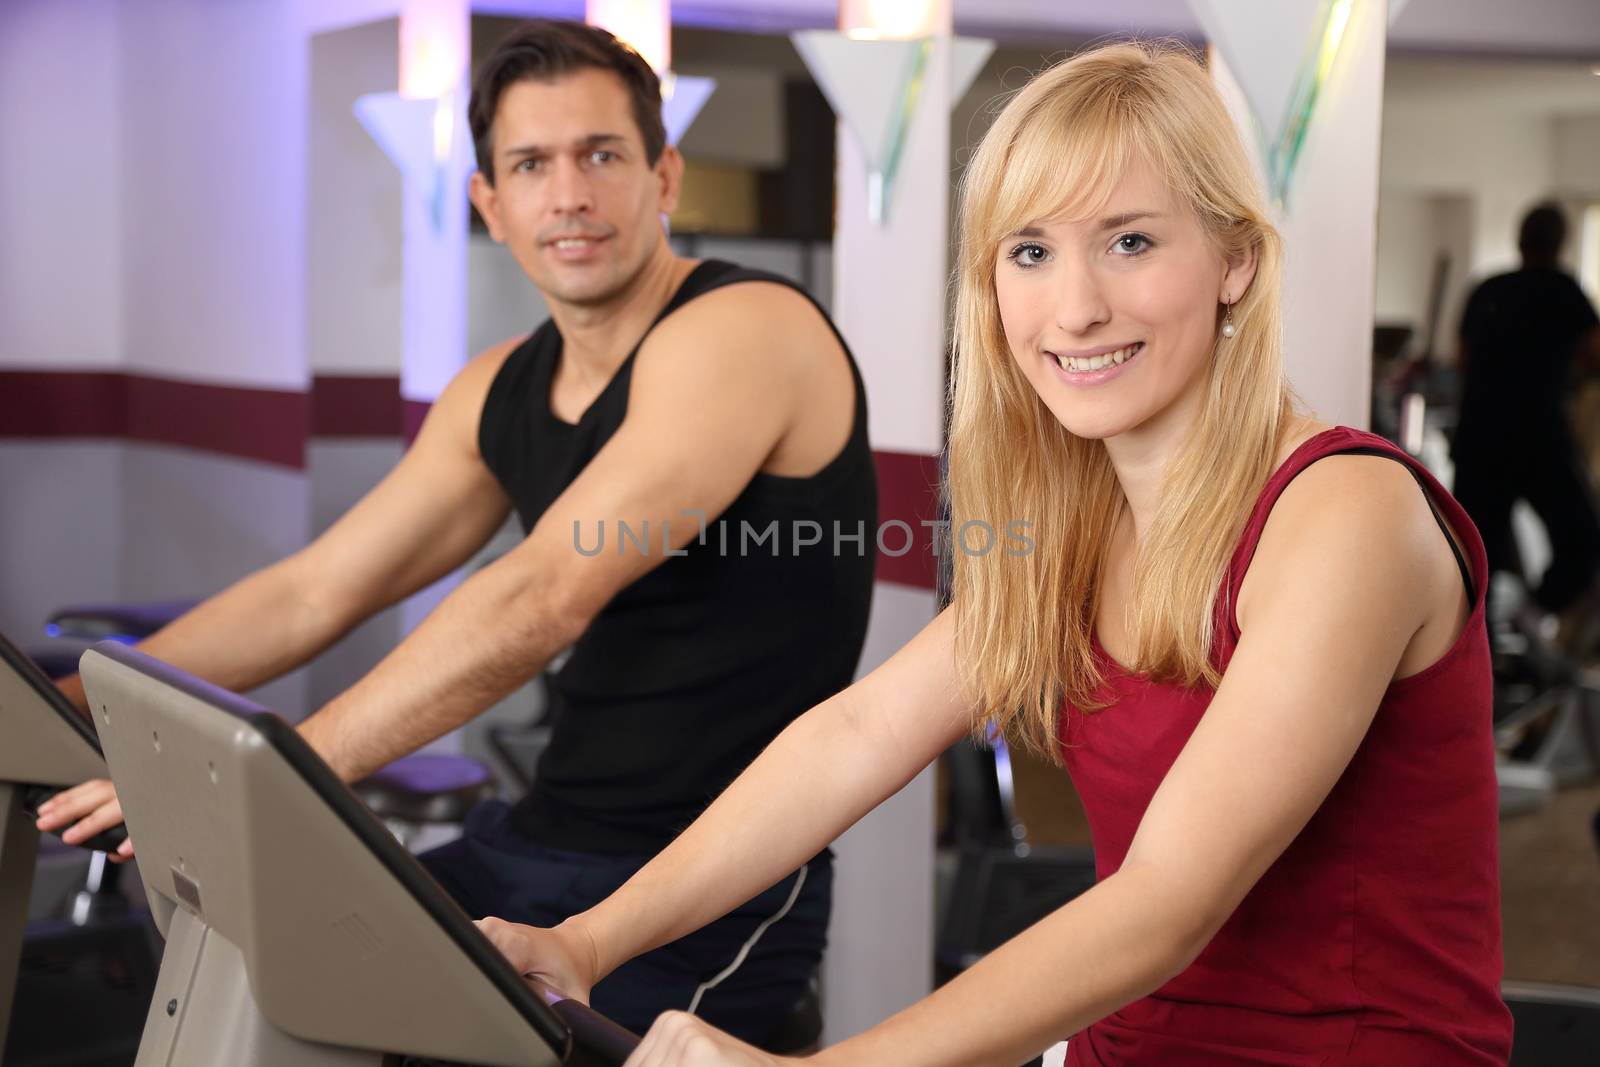 Attractive woman and a man cycling in a gym by ikonoklast_fotografie